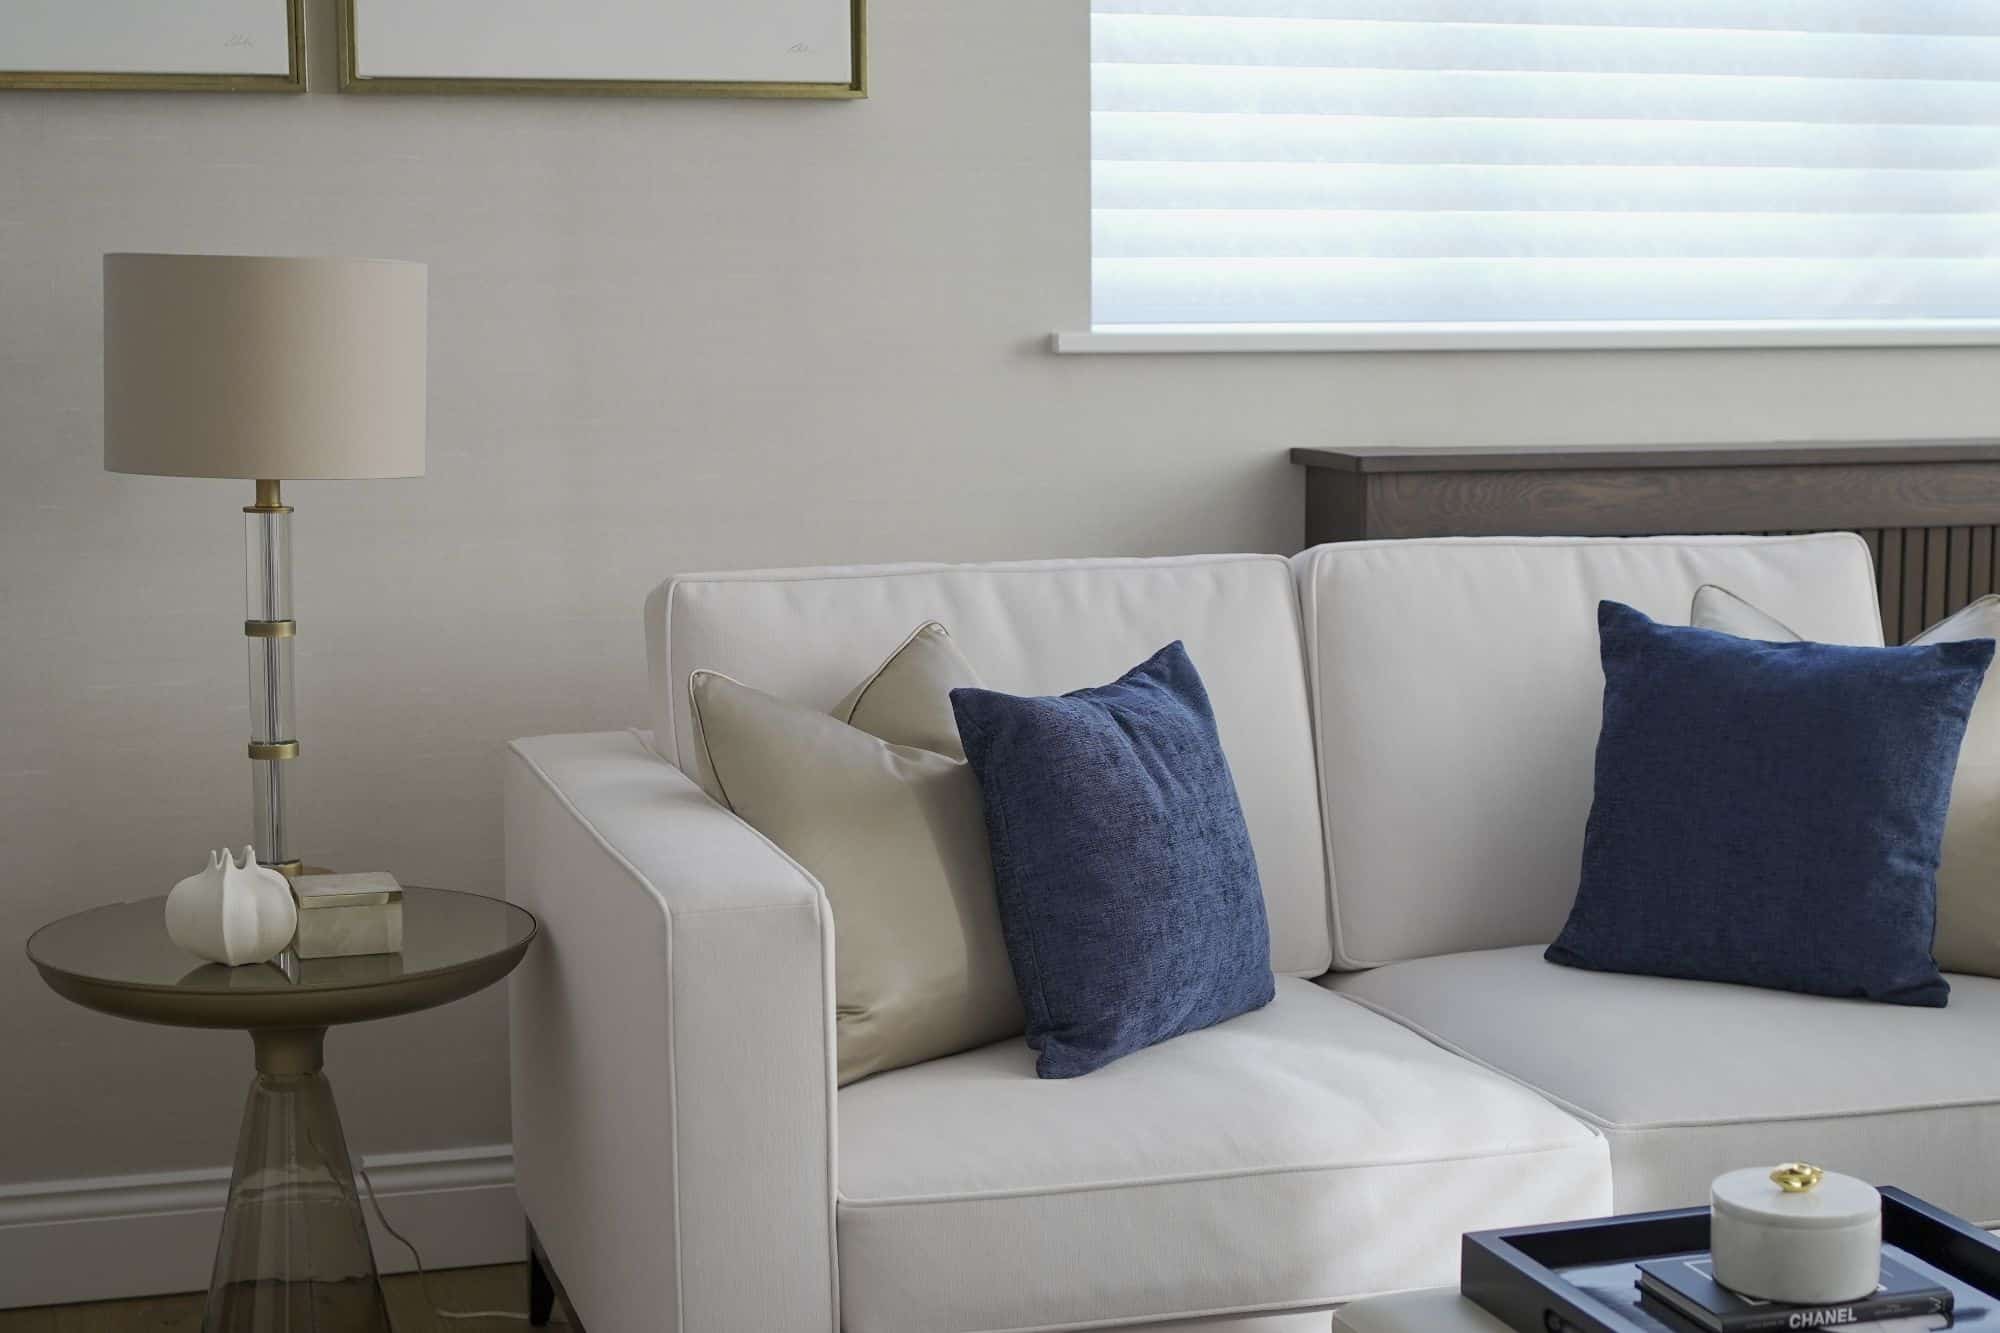 A modern sitting room in muted colours with a modern sofa and glass-based side table